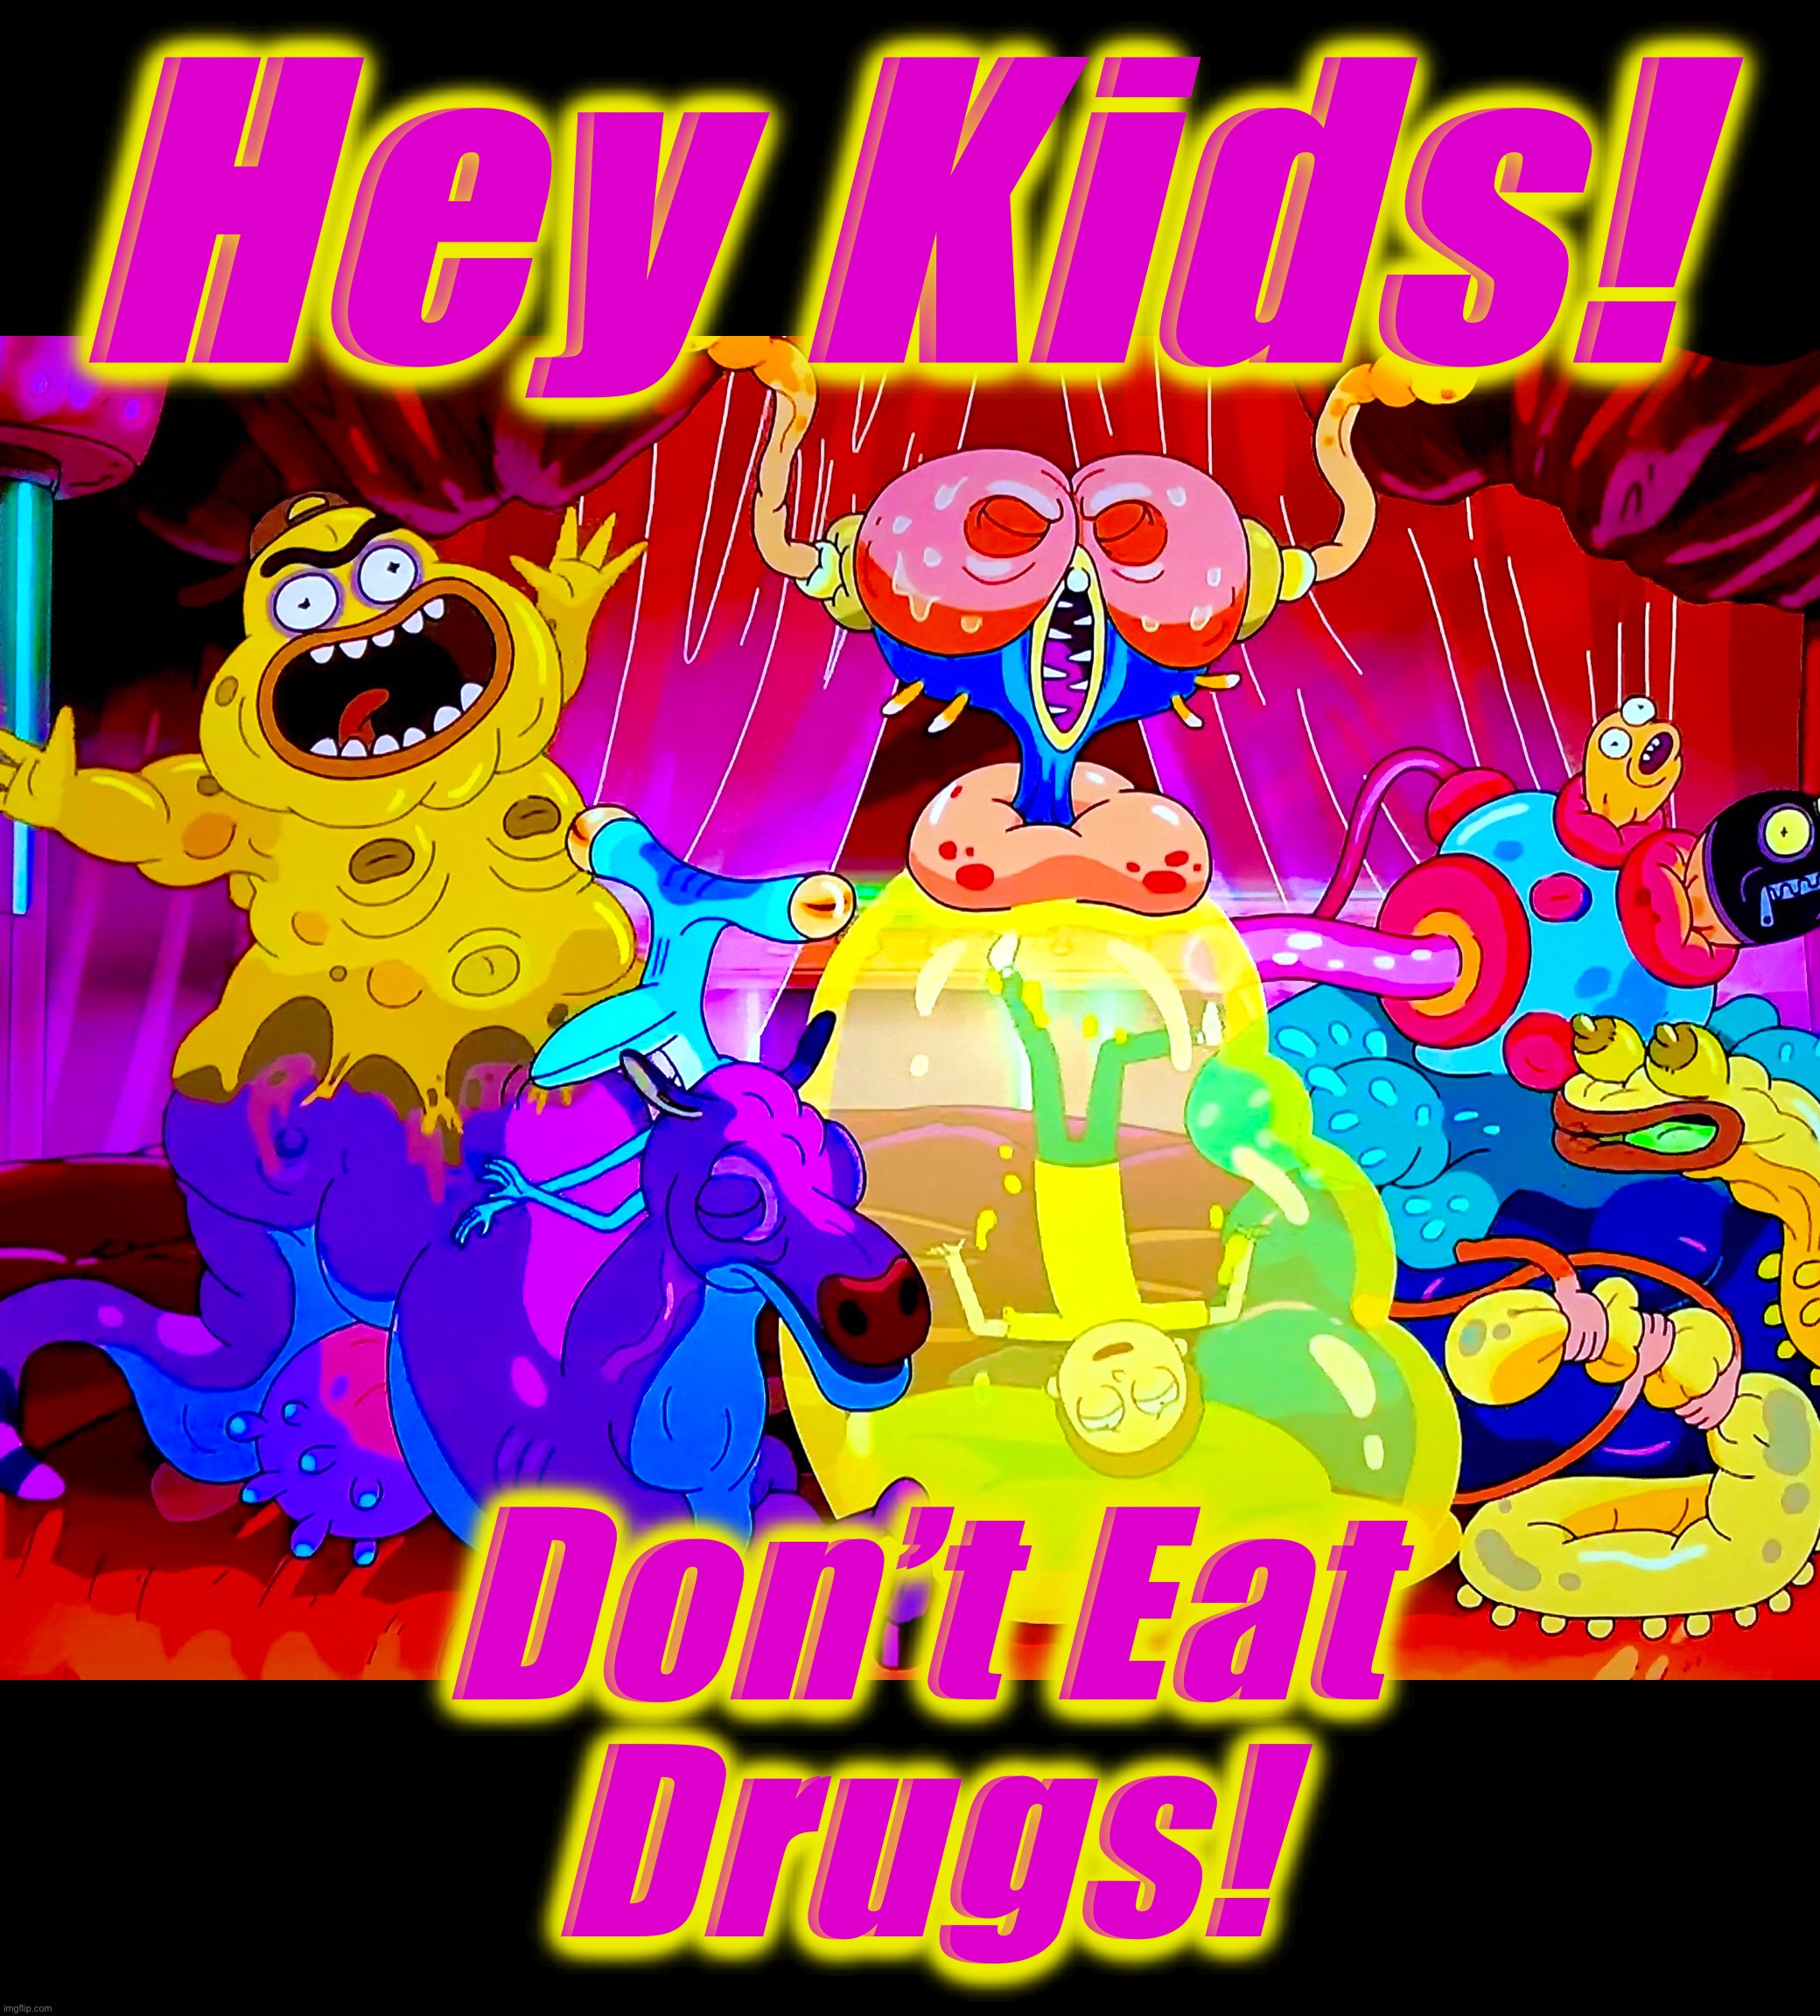 Just Do It! | Hey Kids! Don’t Eat
Drugs! | image tagged in don't do drugs,memes,rick and morty,aliens,hallucinate,psa | made w/ Imgflip meme maker